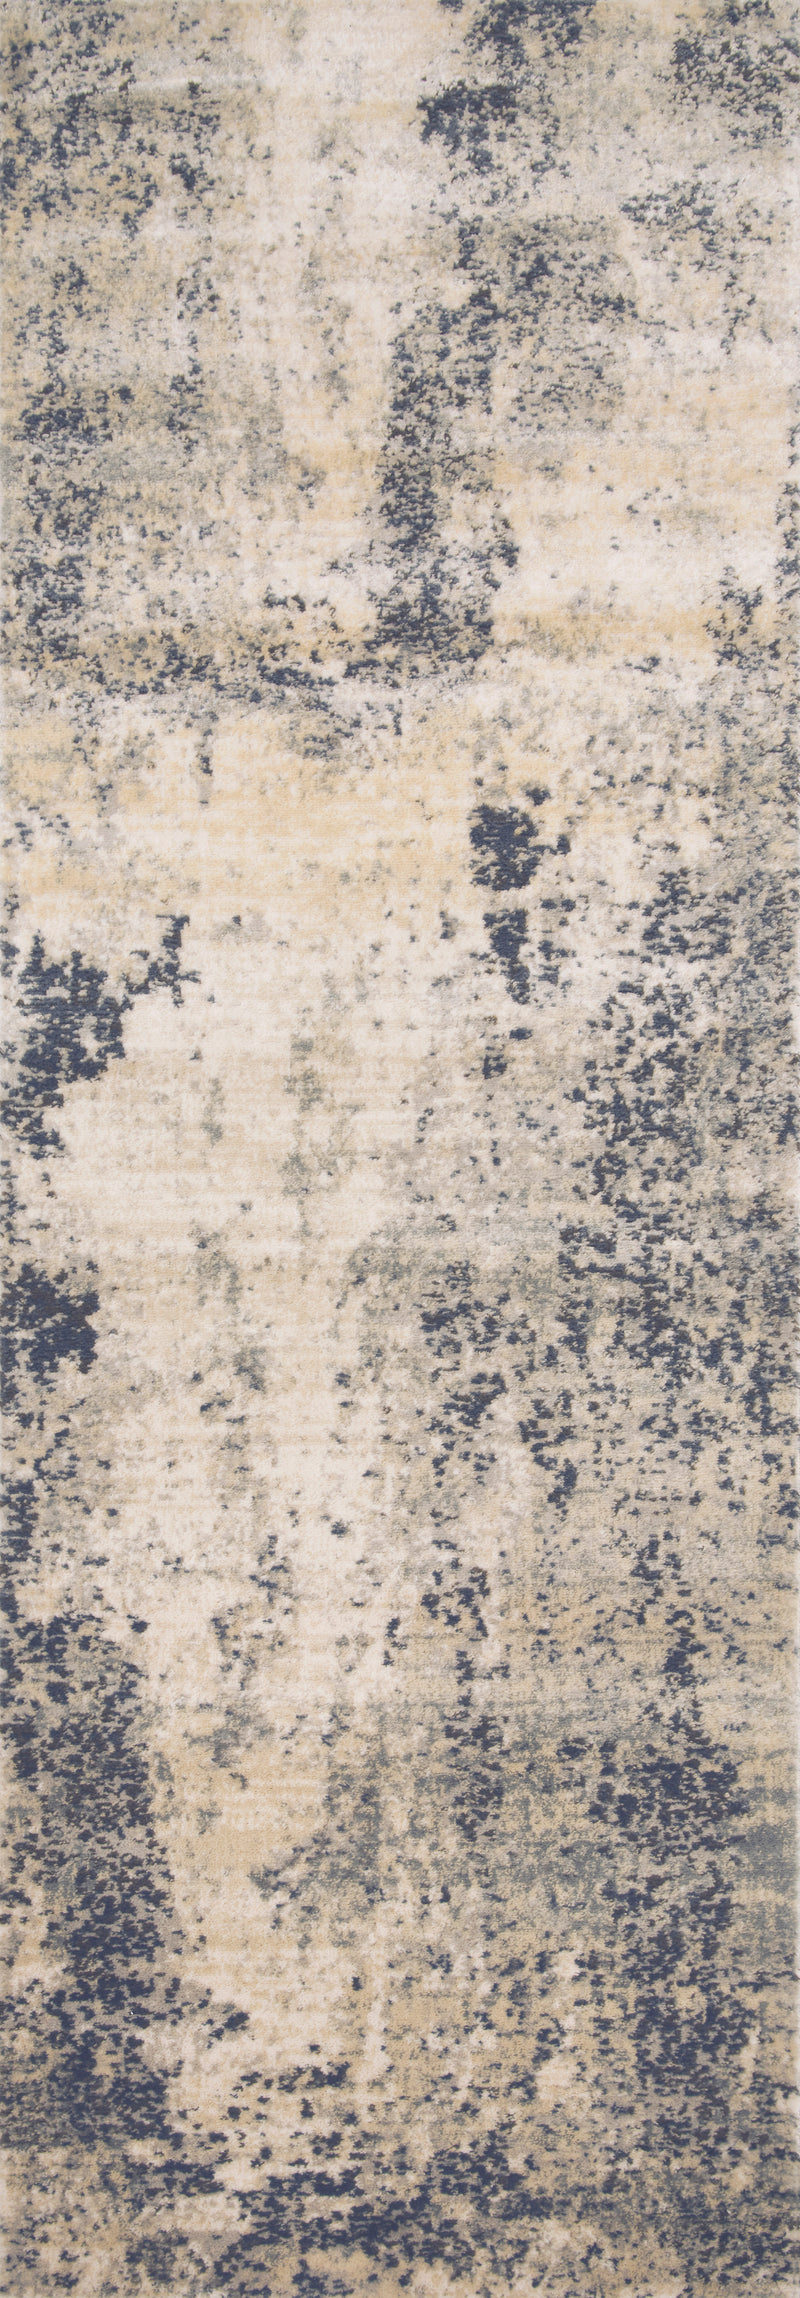 media image for Teagan Rug in Natural / Denim by Loloi II 261